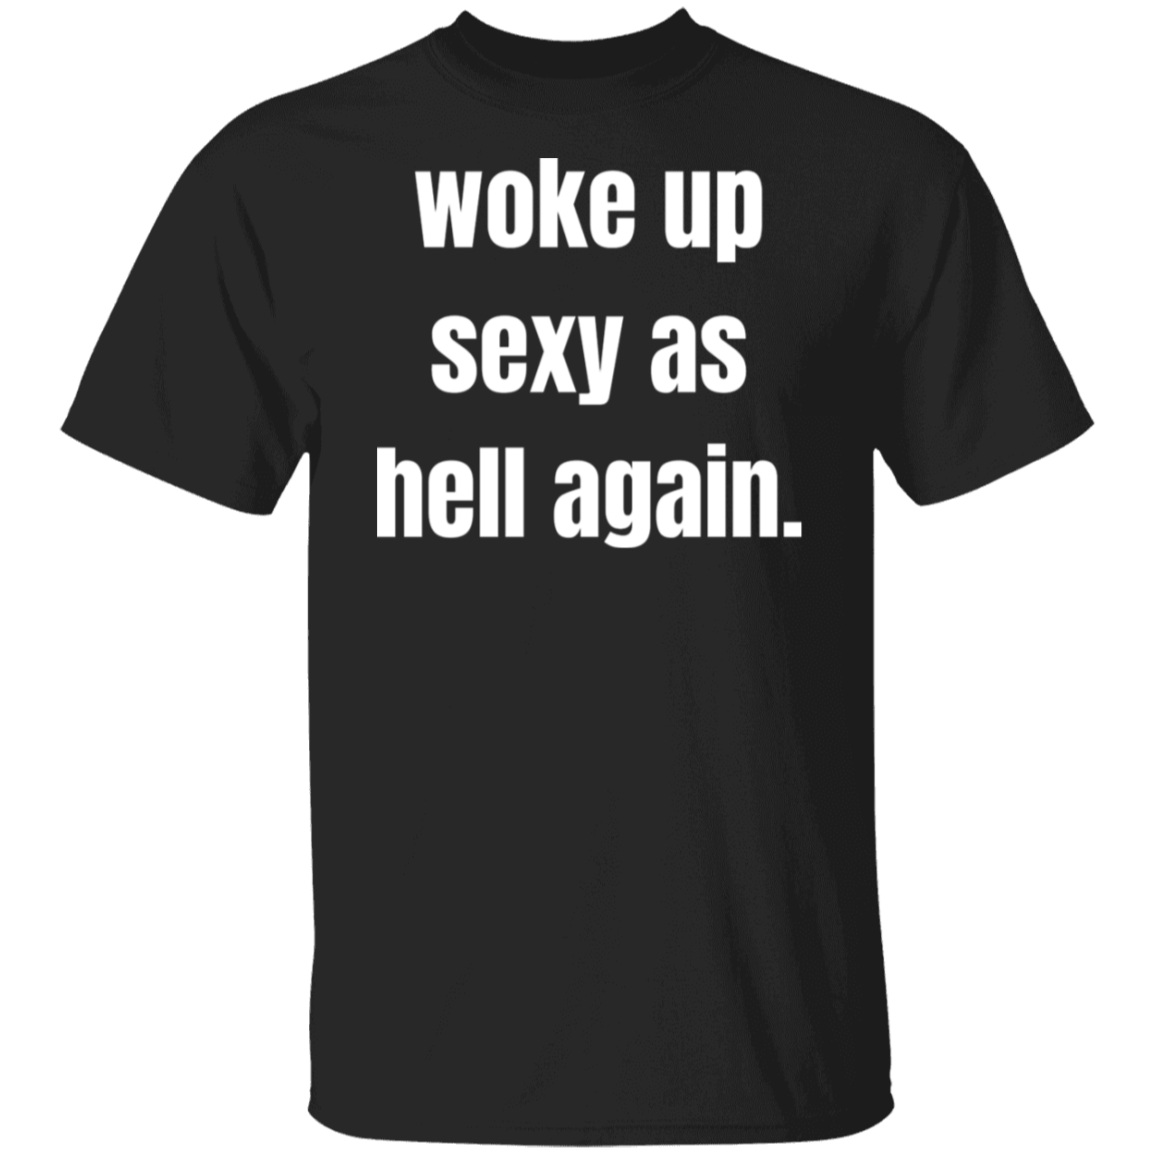 woke up sexy as hell again T-Shirt for that Sexy someone in your life!